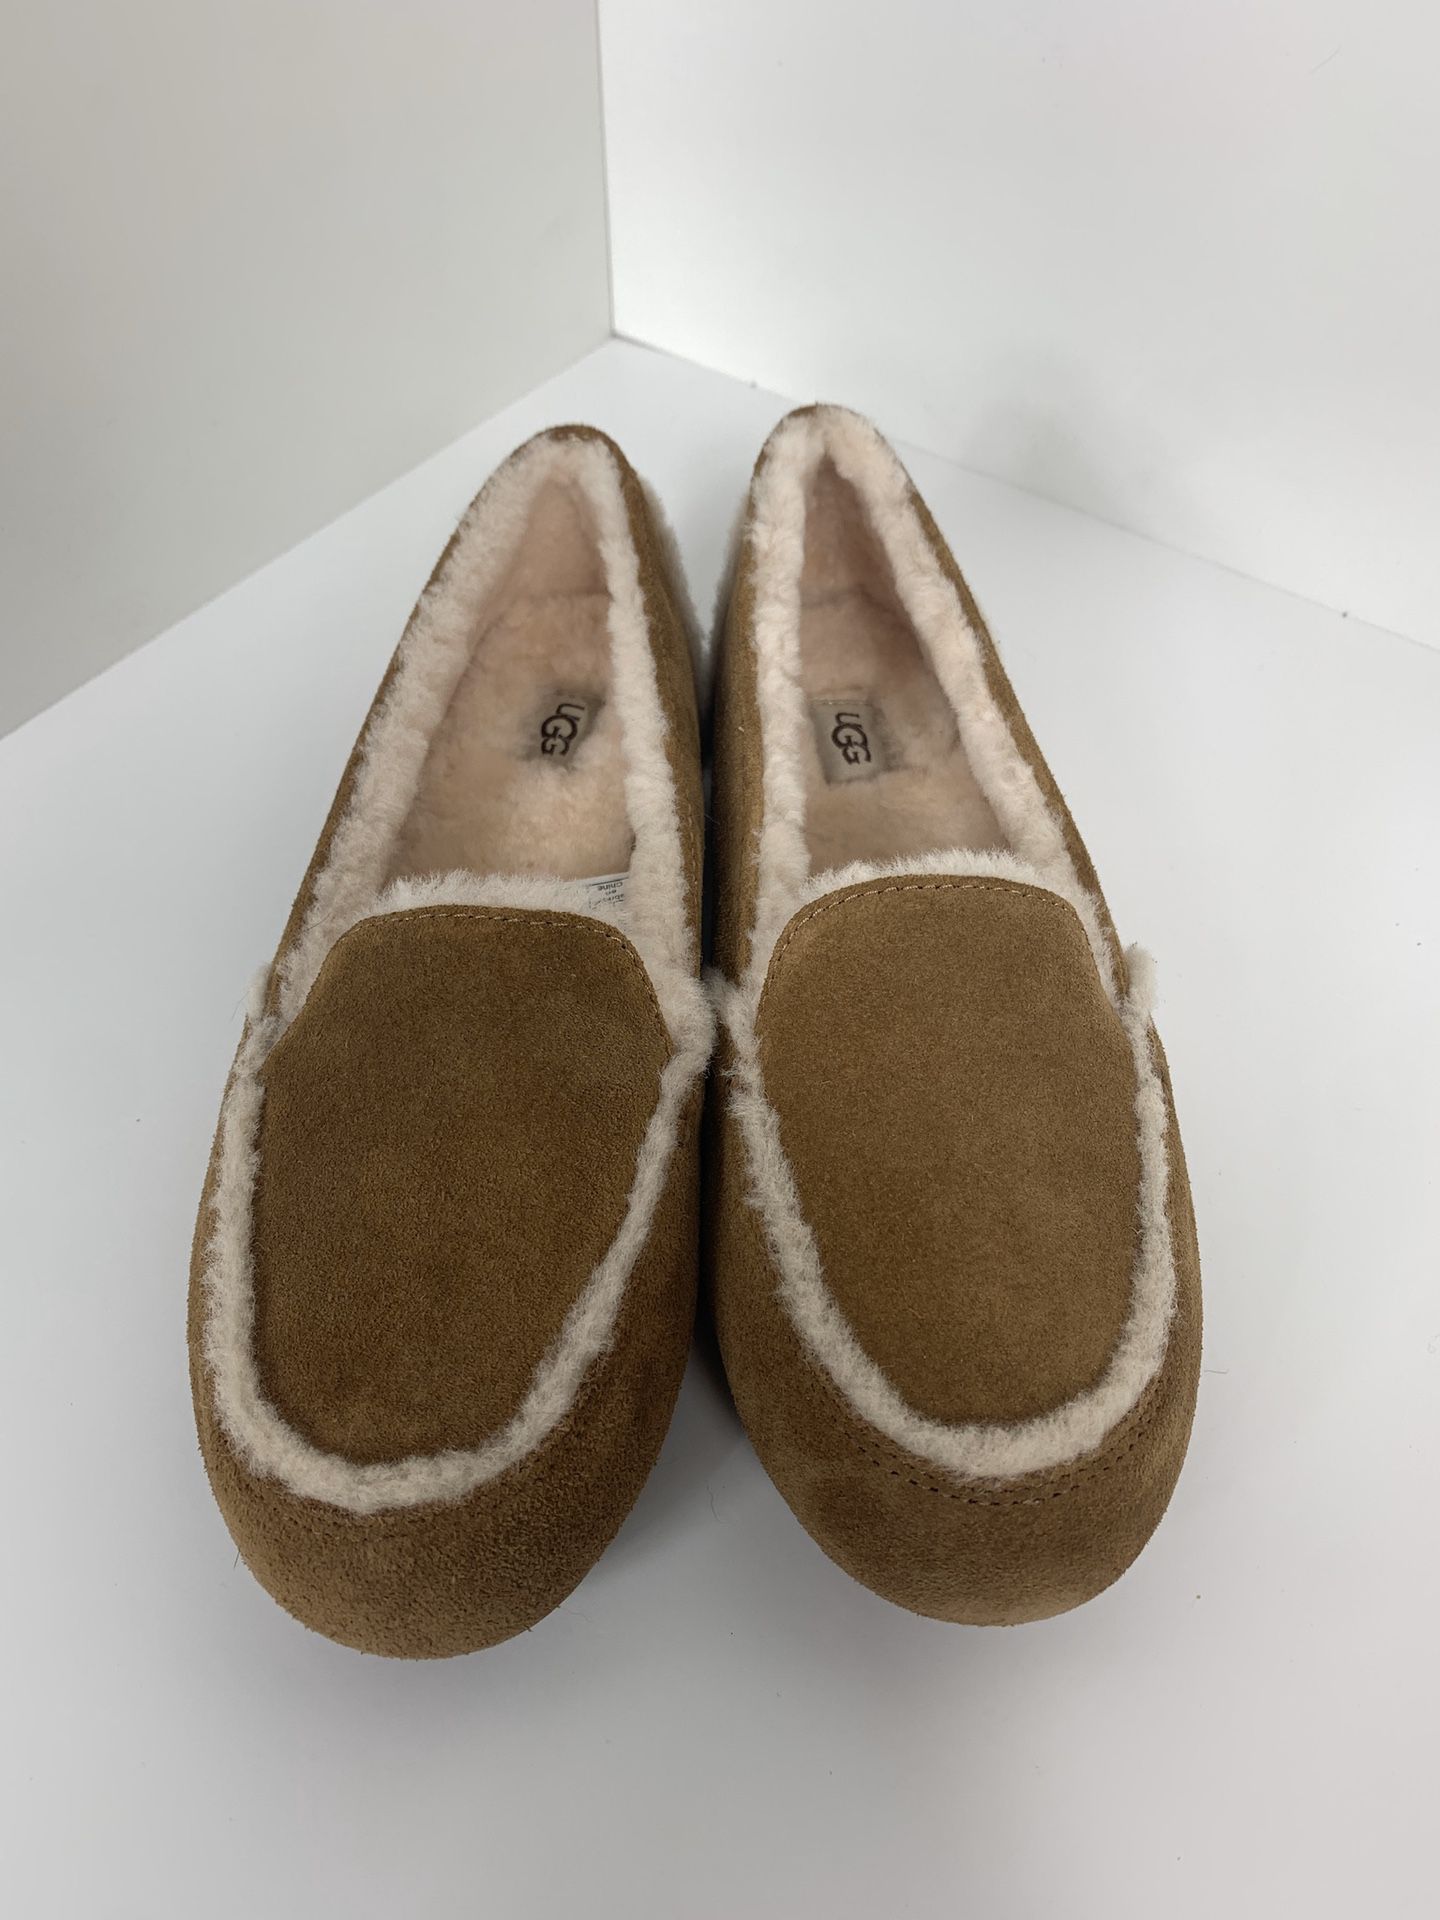 Ugg Slip-on Loafers Size 8.5 New